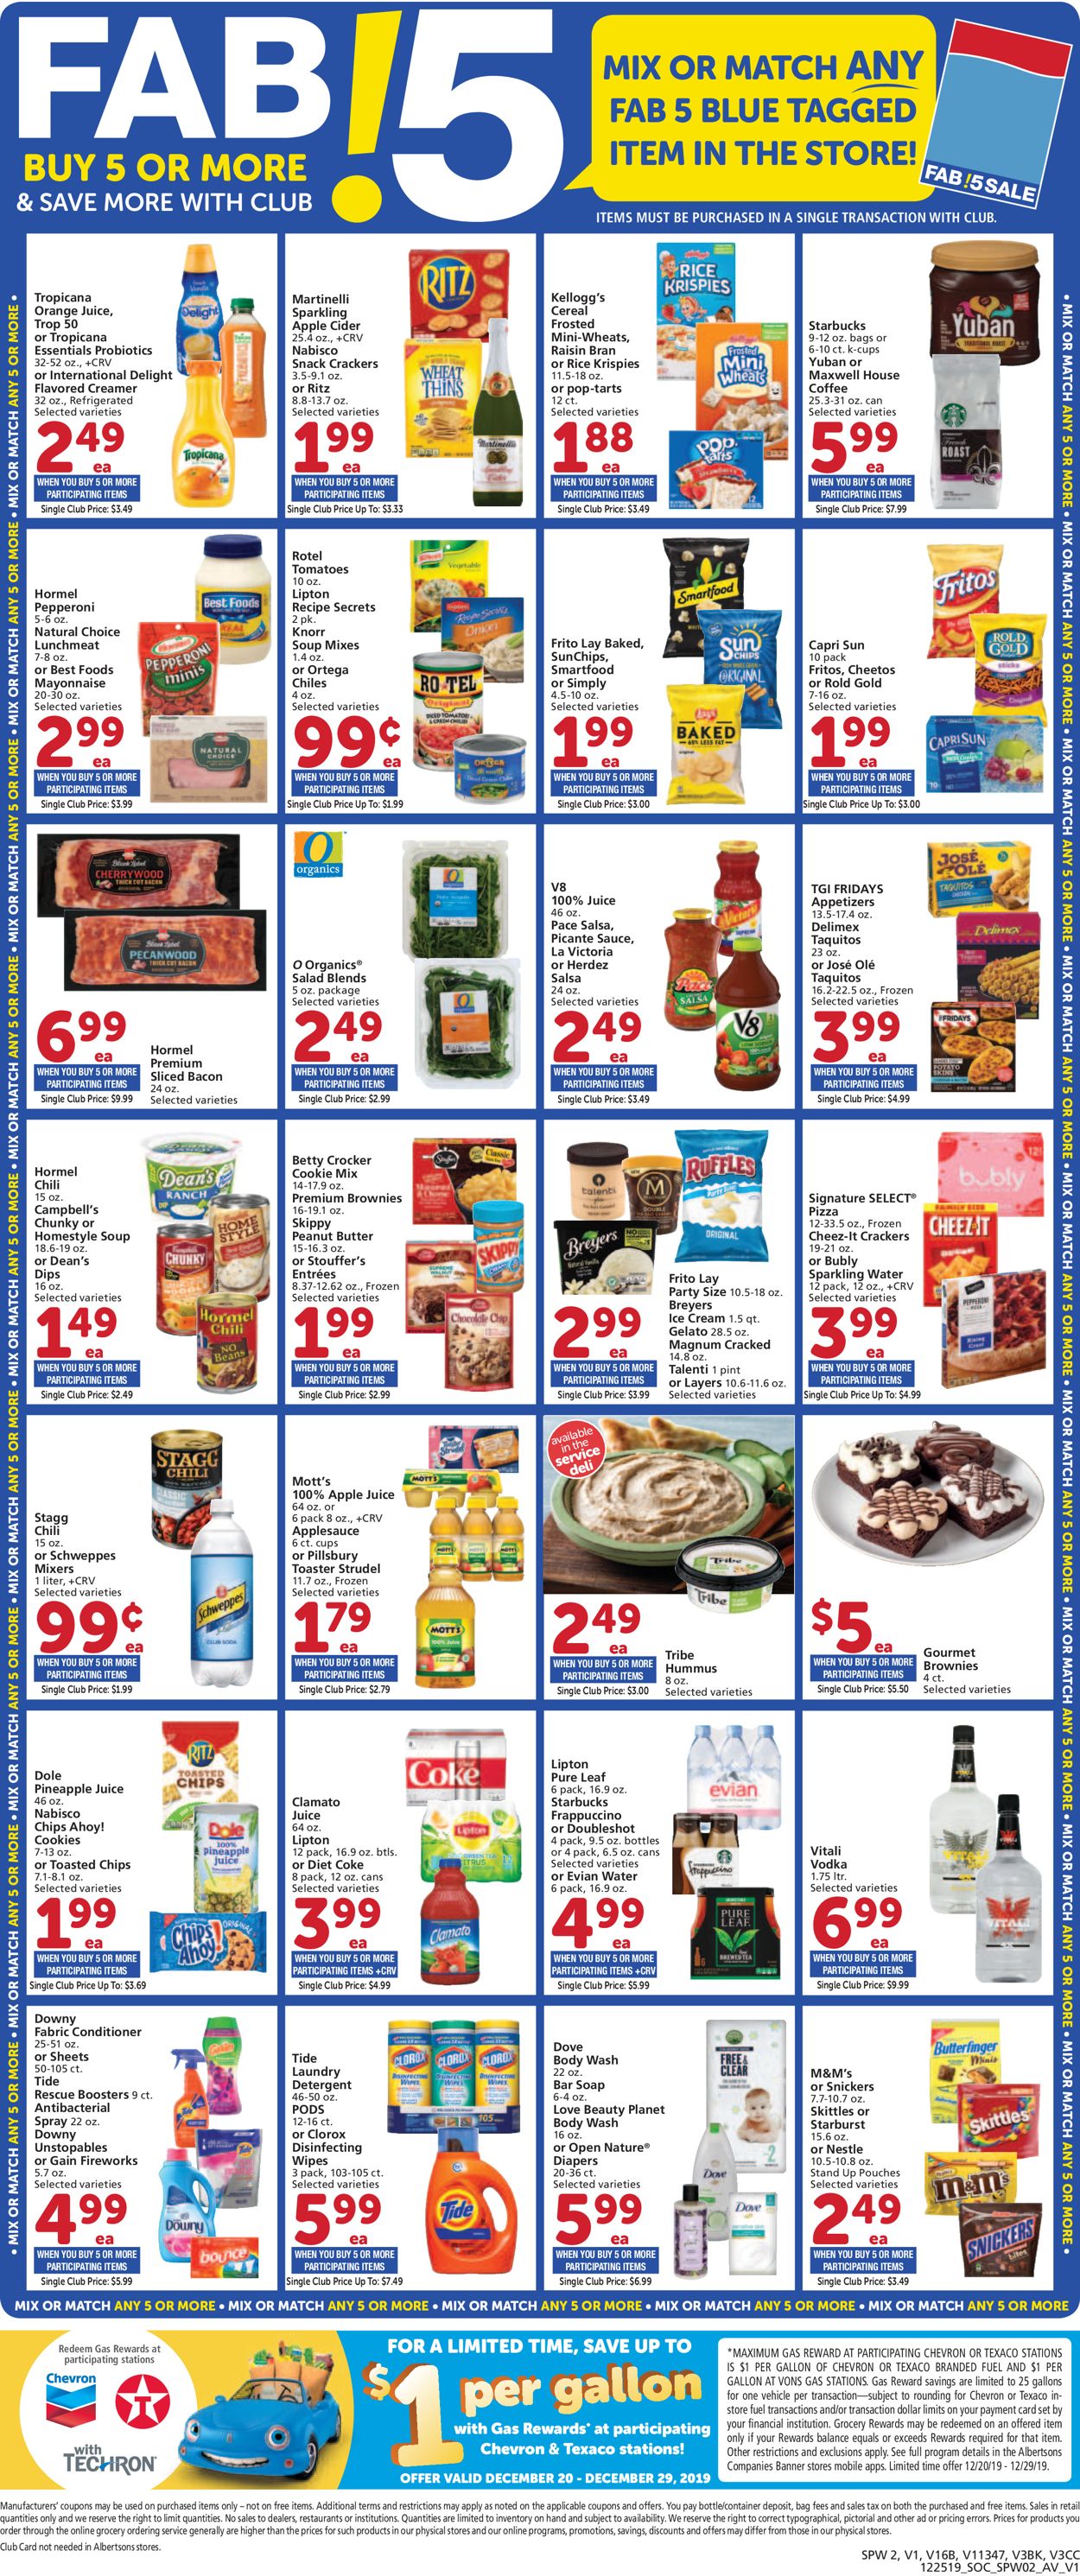 Vons - New Years's Ad 2019/2020 Weekly Ad Circular - valid 12/28-12/31/2019 (Page 2)